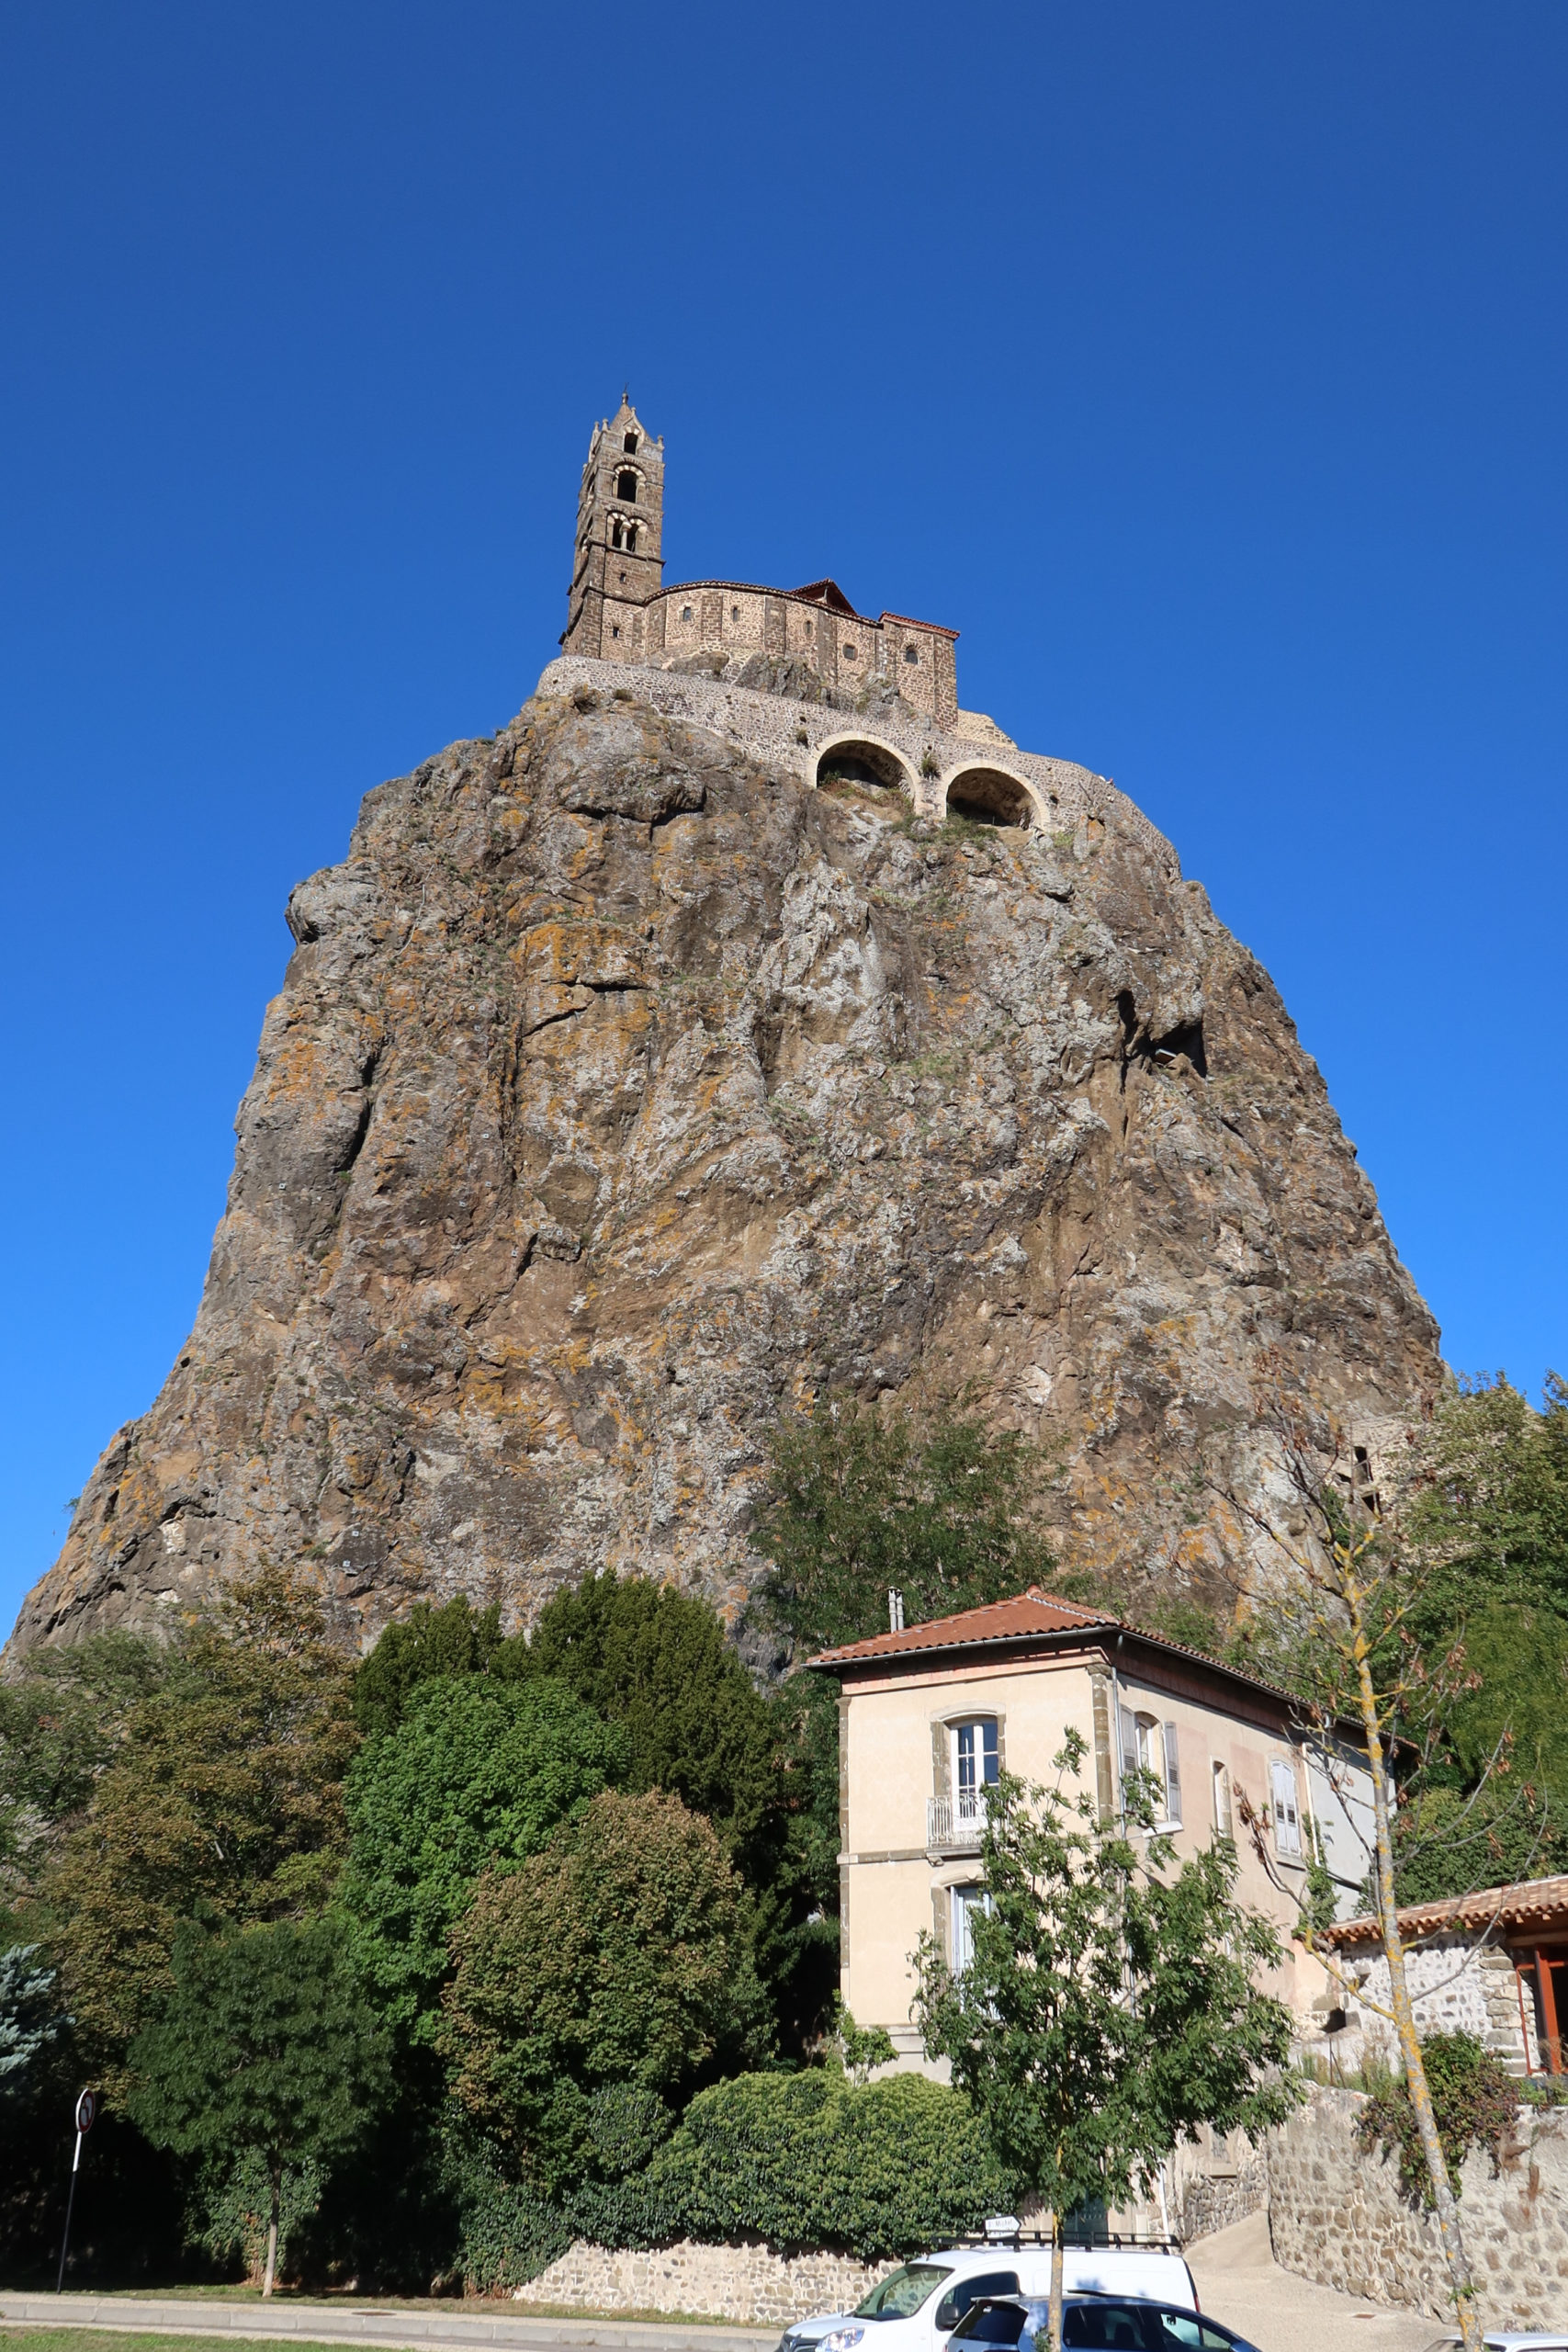 The 10th century chapel of St Michel seems very small when the view includes the massive volcanic spike the building sits upon.